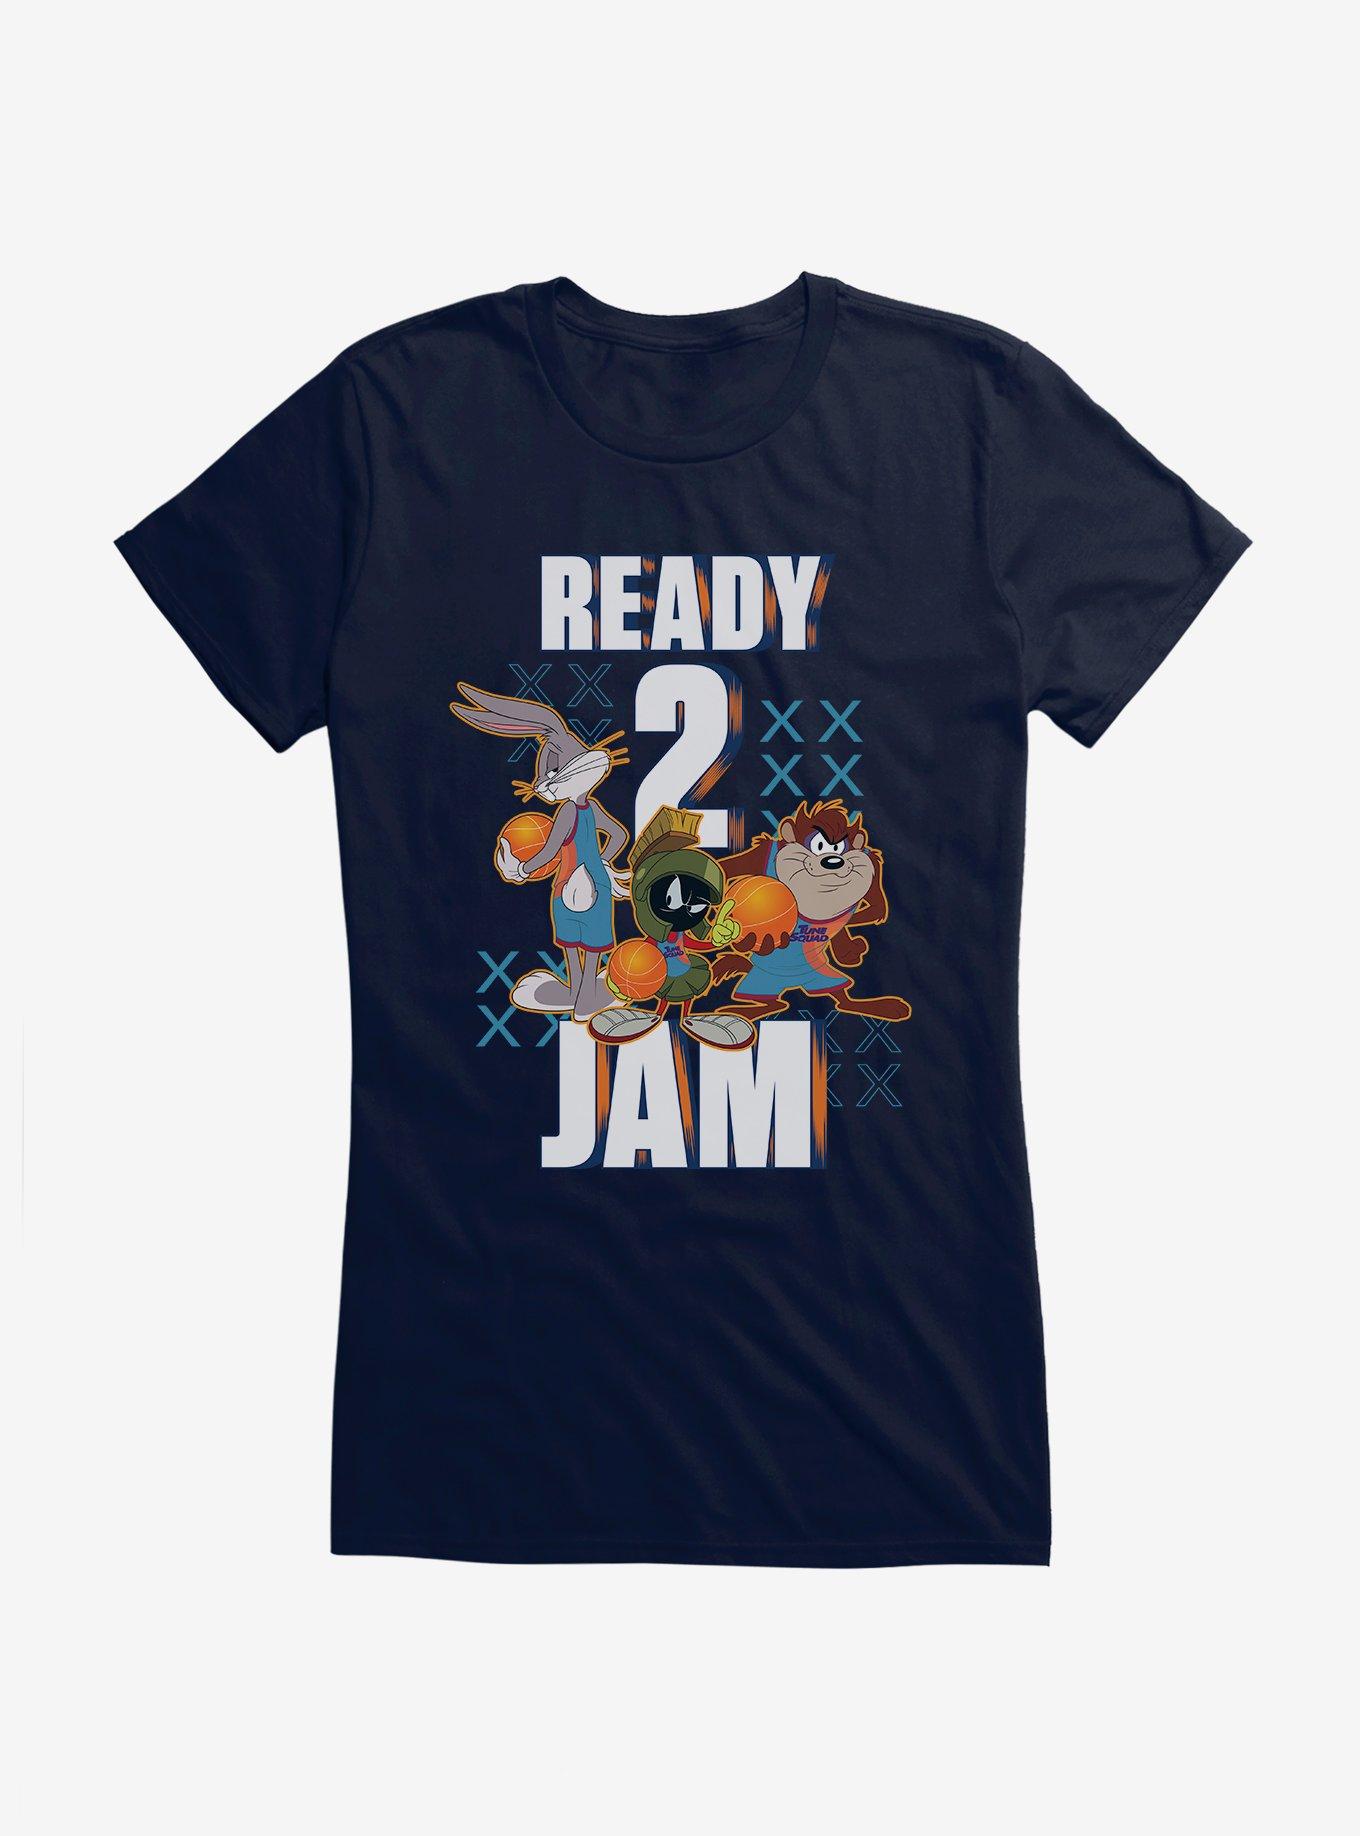 Space Jam: A New Legacy Bugs Bunny, Marvin The Martian, And Taz Ready 2 Jam Girls T-Shirt, , hi-res